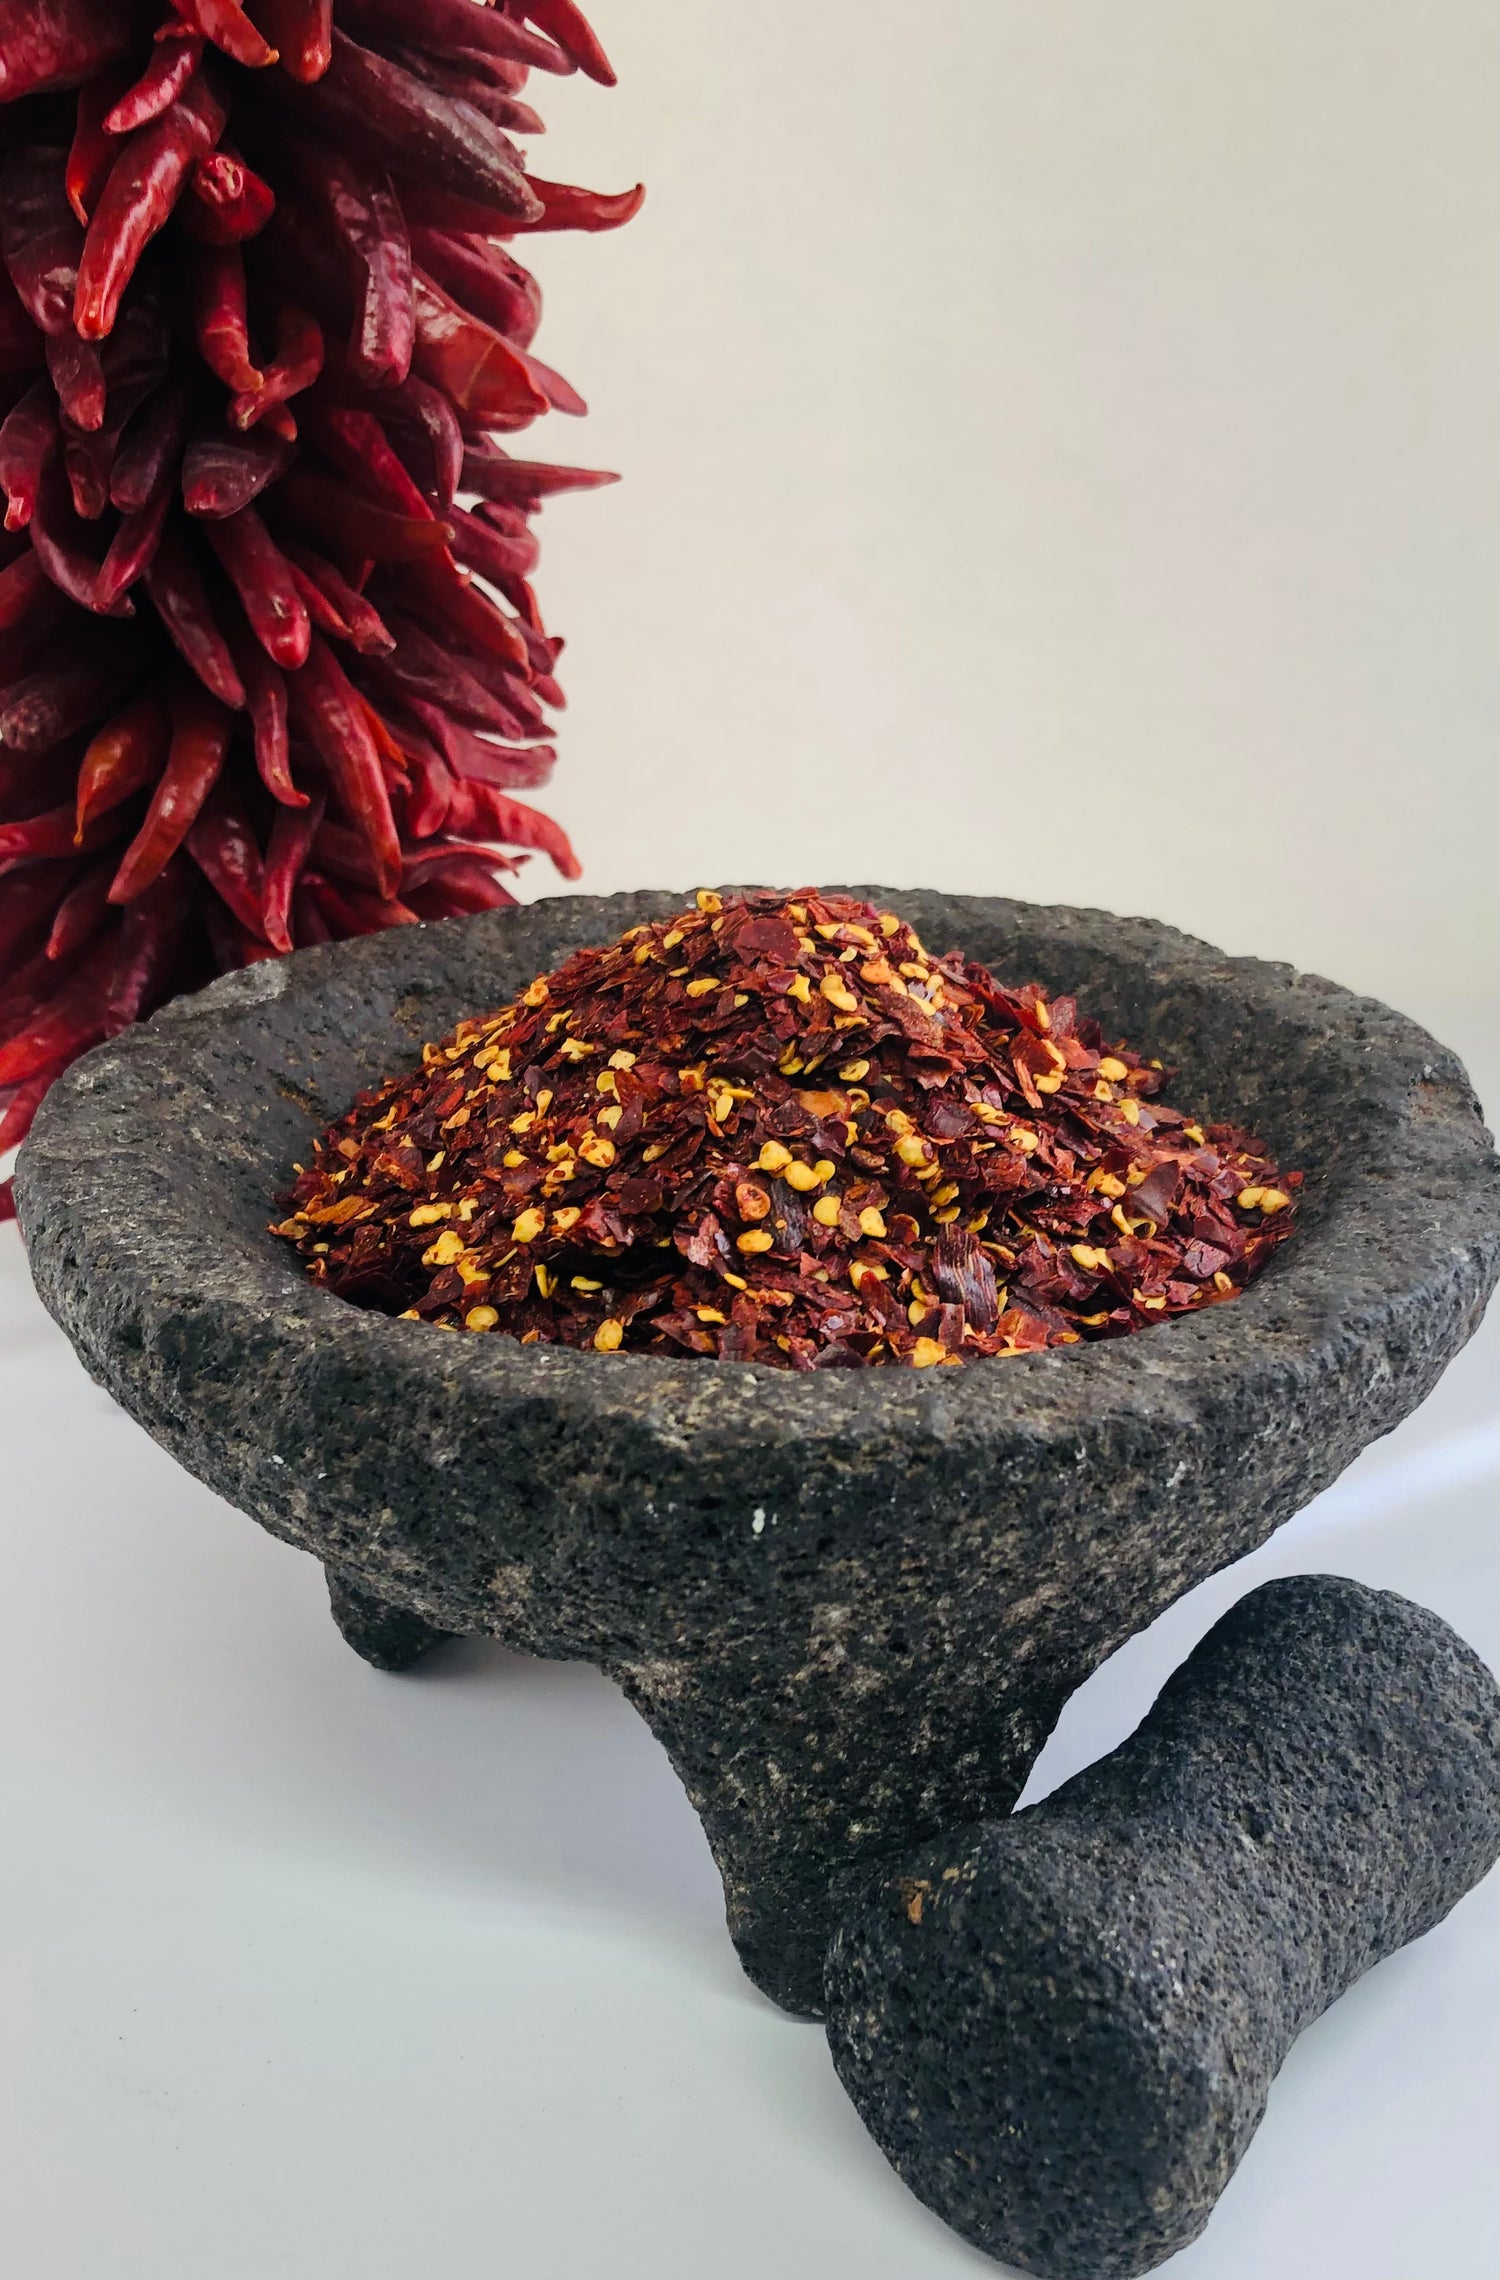 Crushed Chile Peppers Red (caribe)-Mild